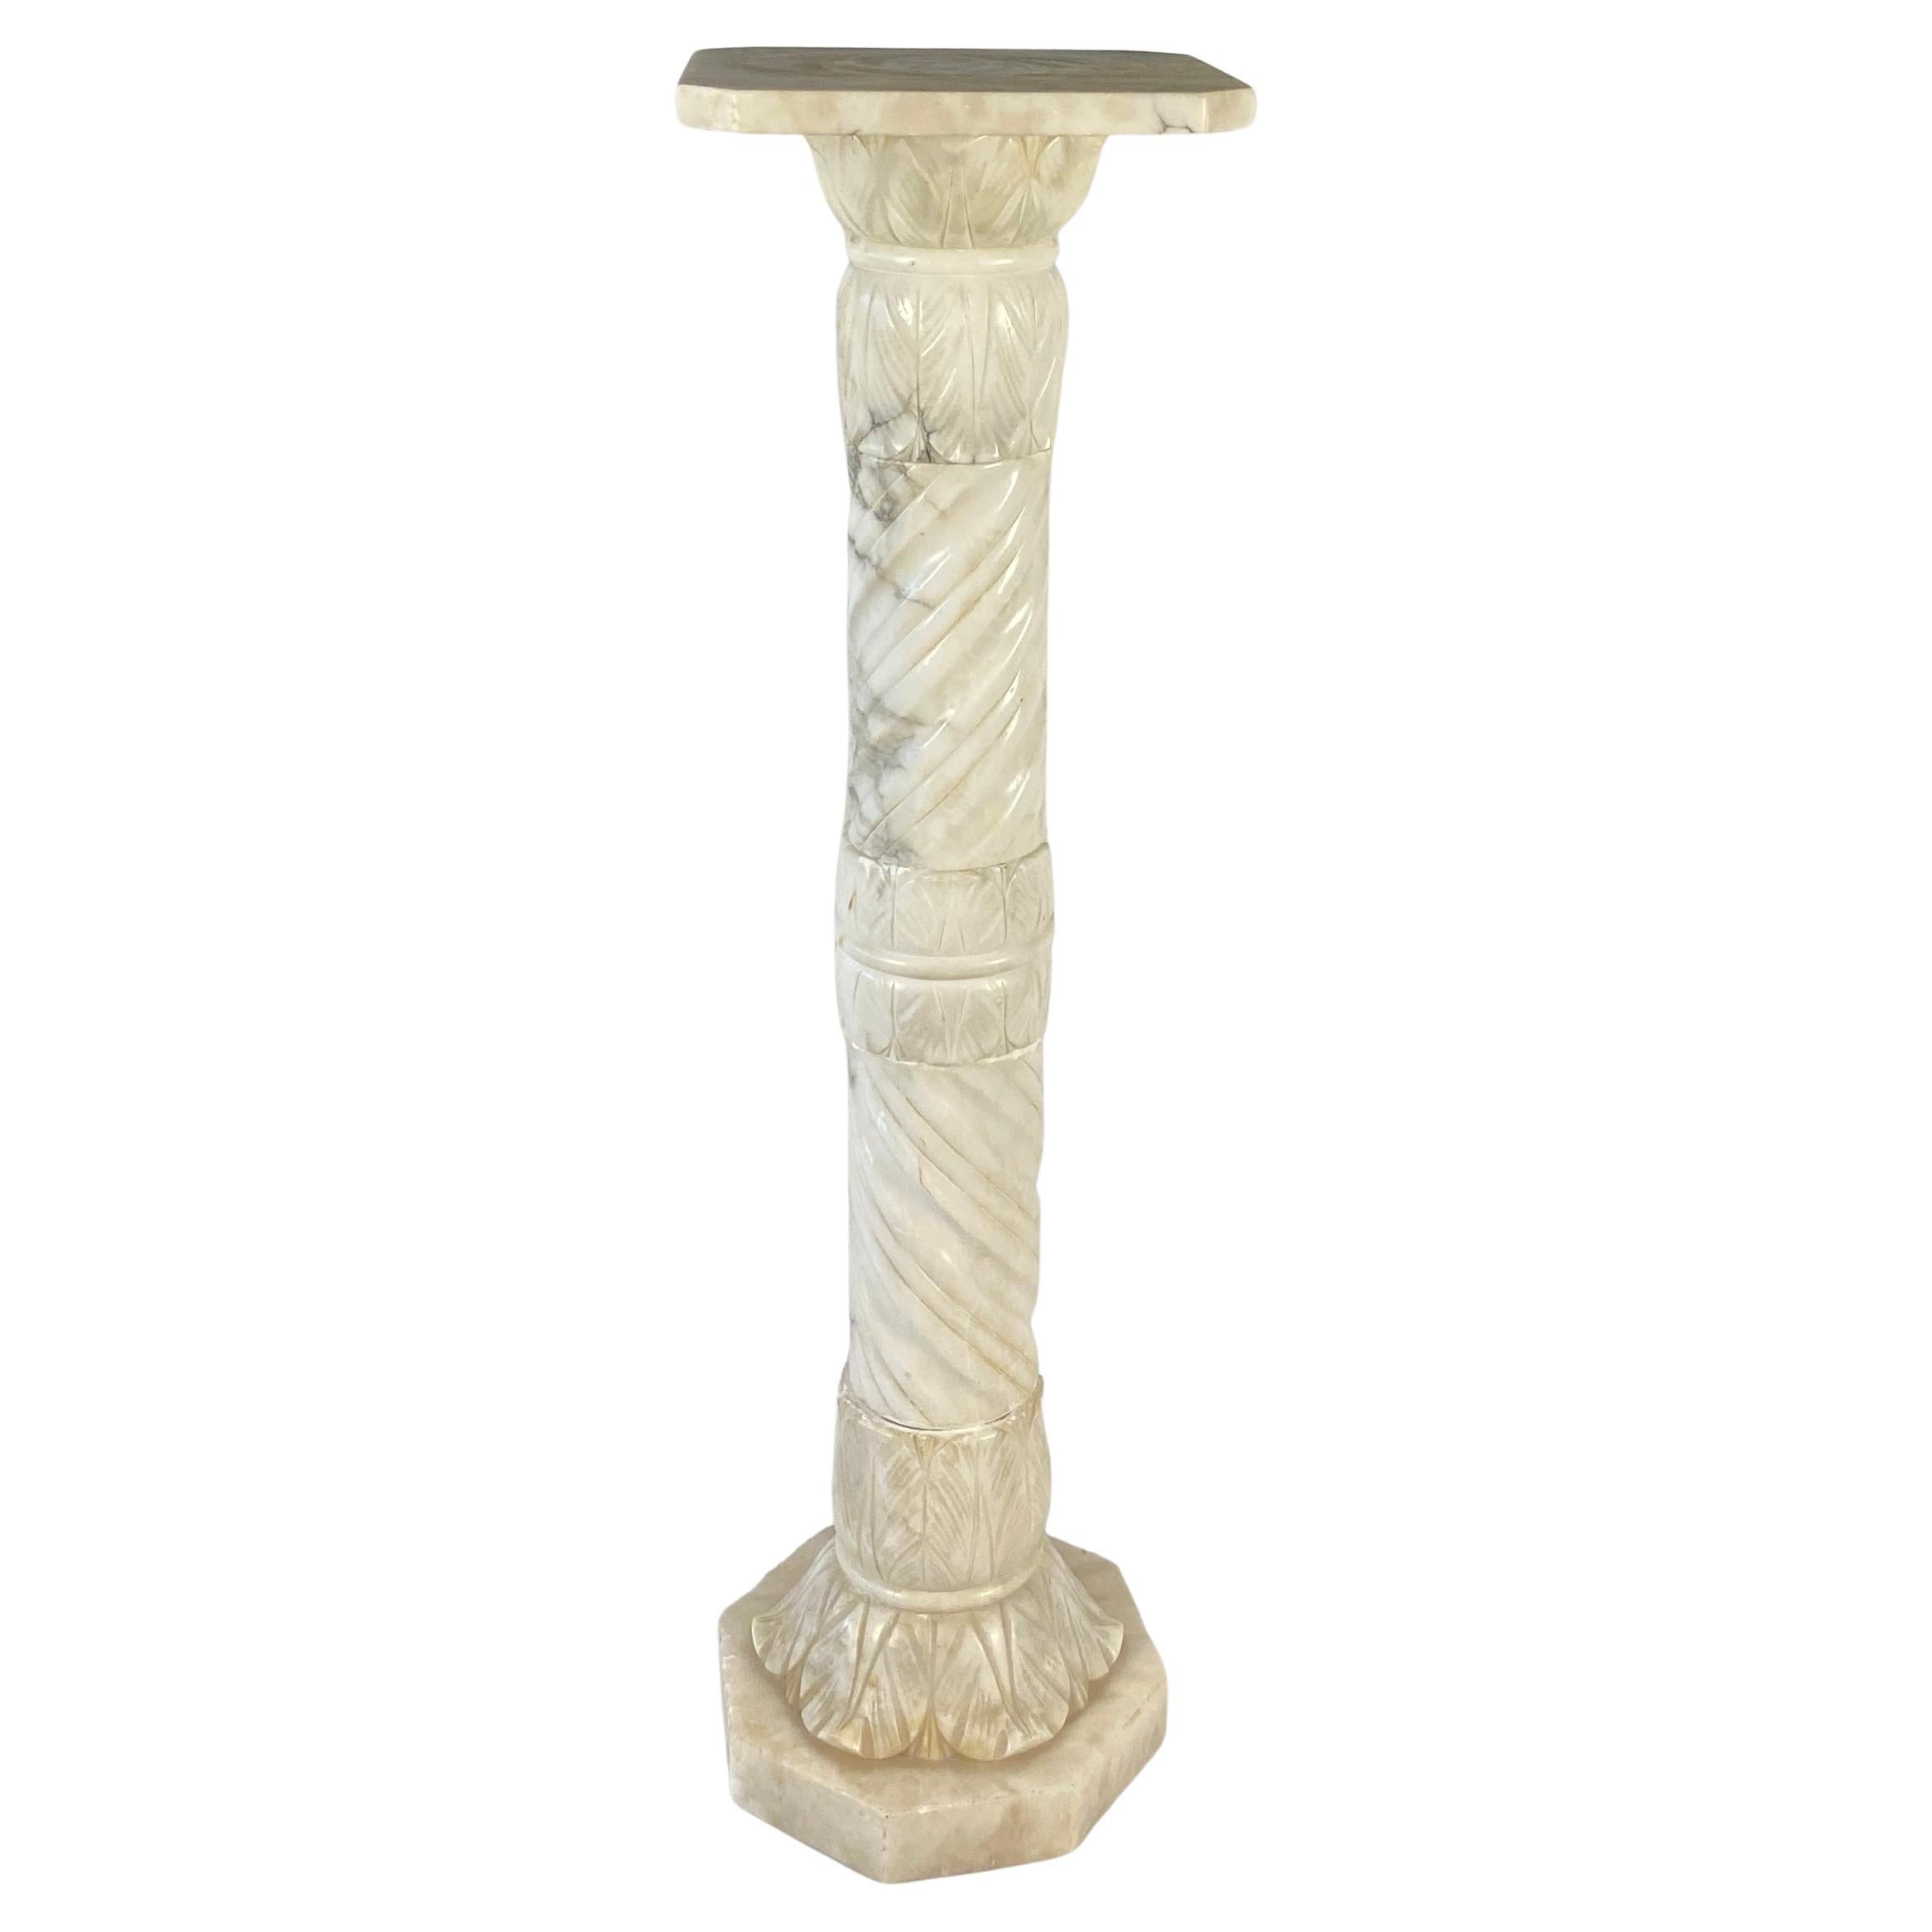 19th Century Italian Hand-Carved Carrara Marble Pedestal or Decorative Stand